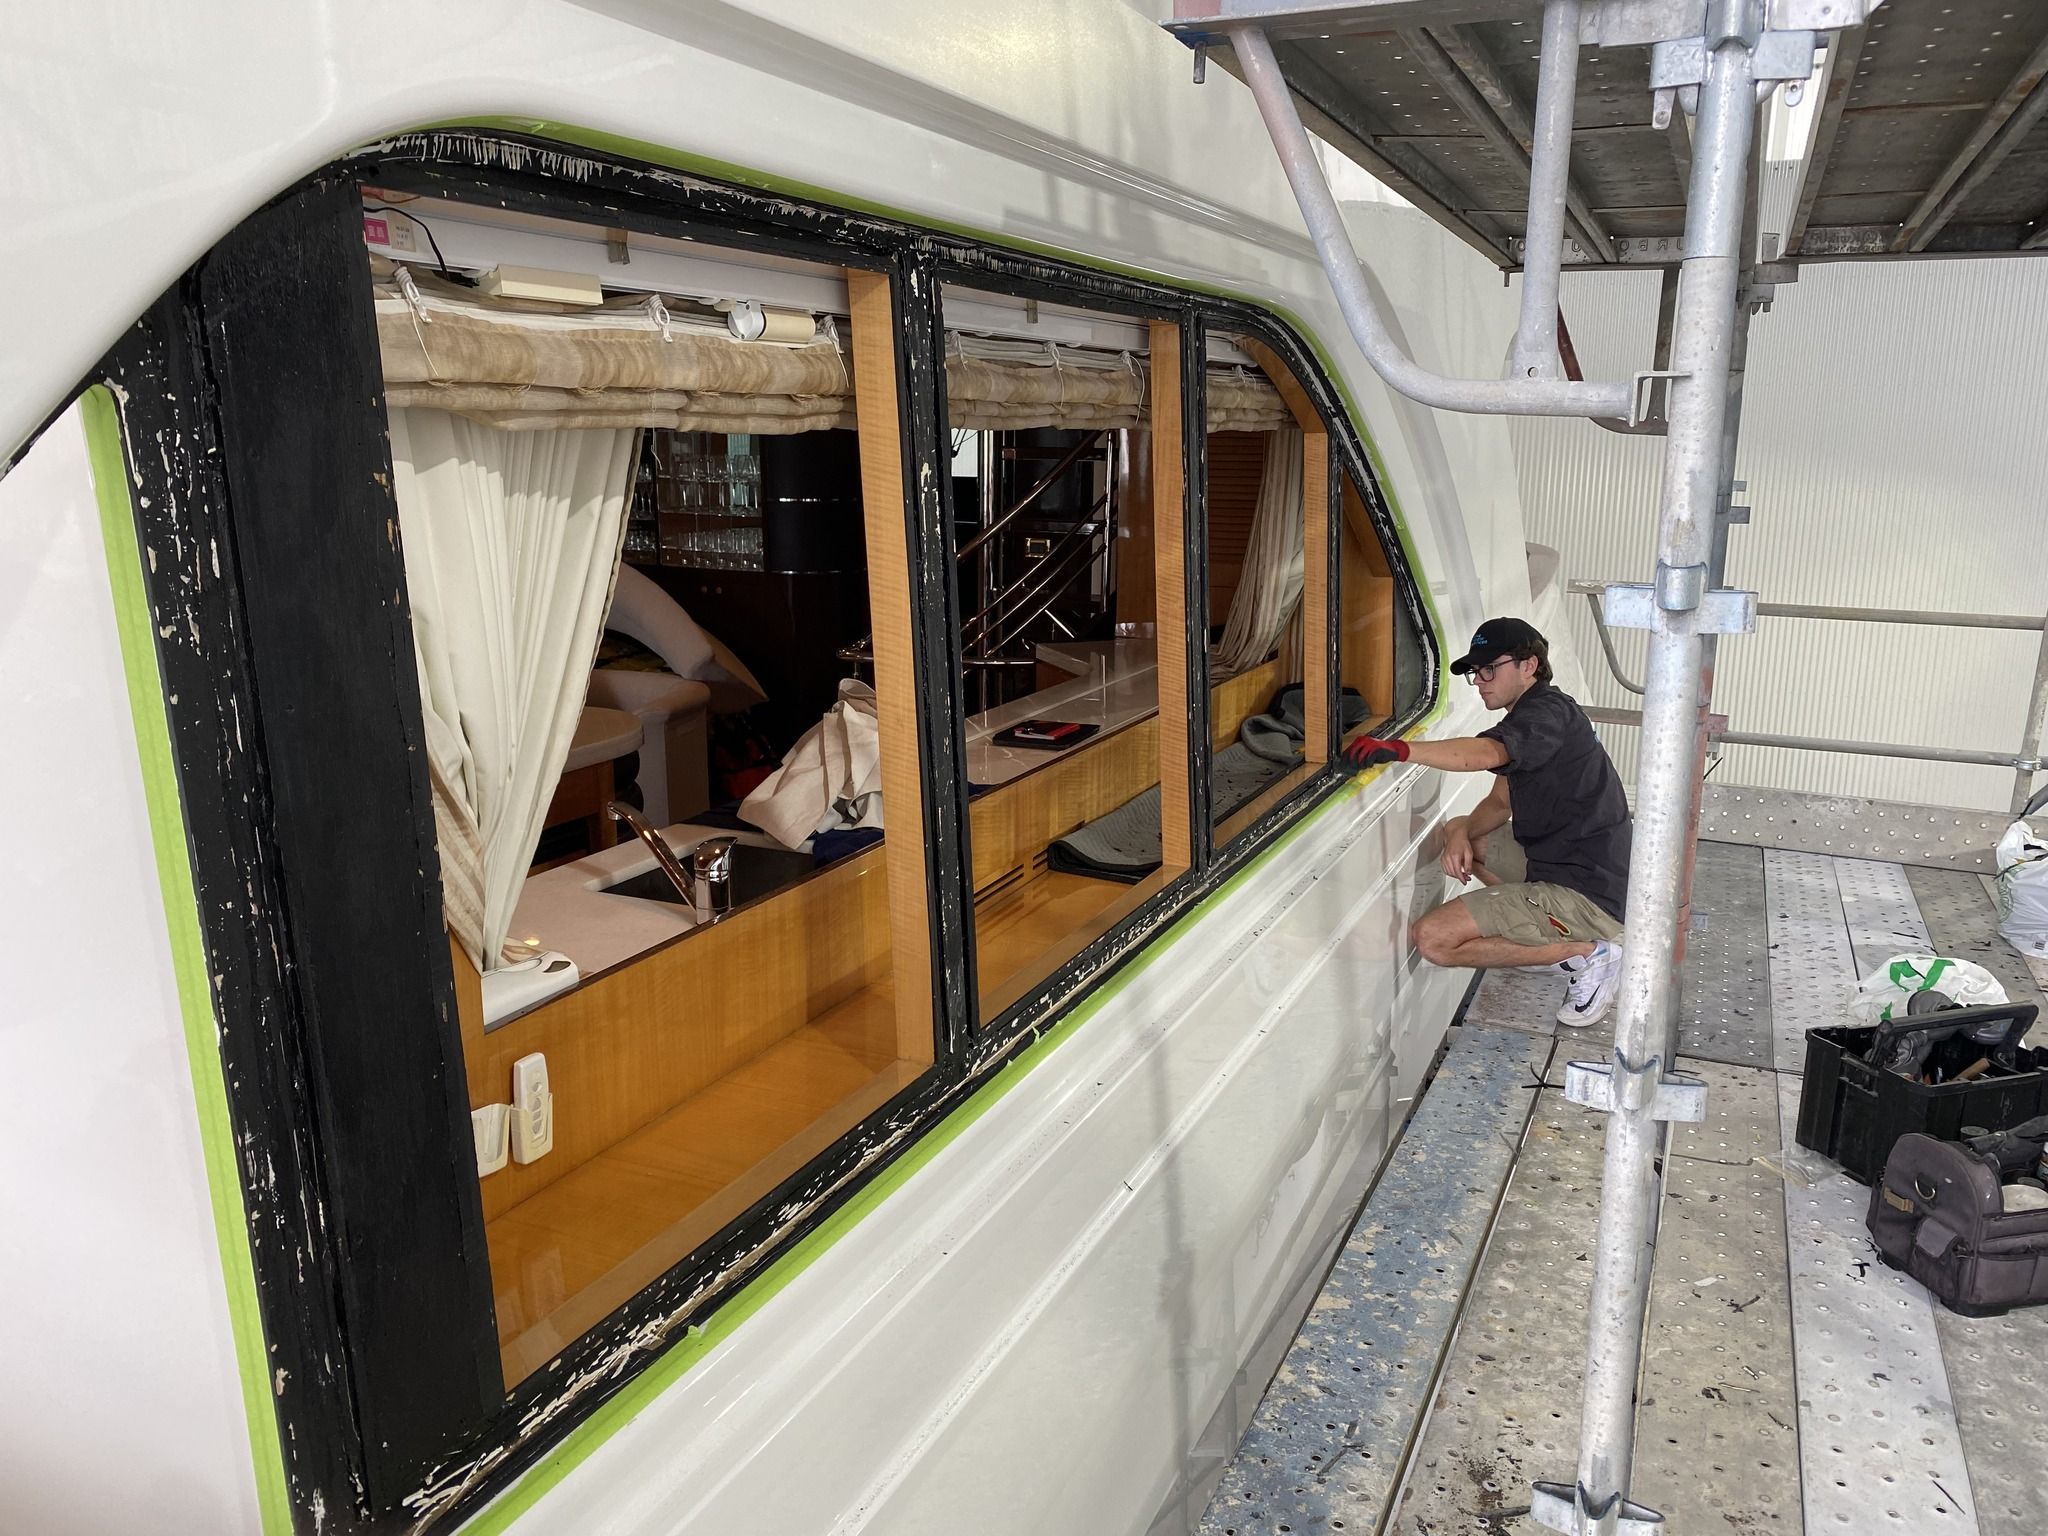 marine refit services, marine window repairs, marine window replacements, marine window maintenance, replacement marine windows, boat window repairs and replacements